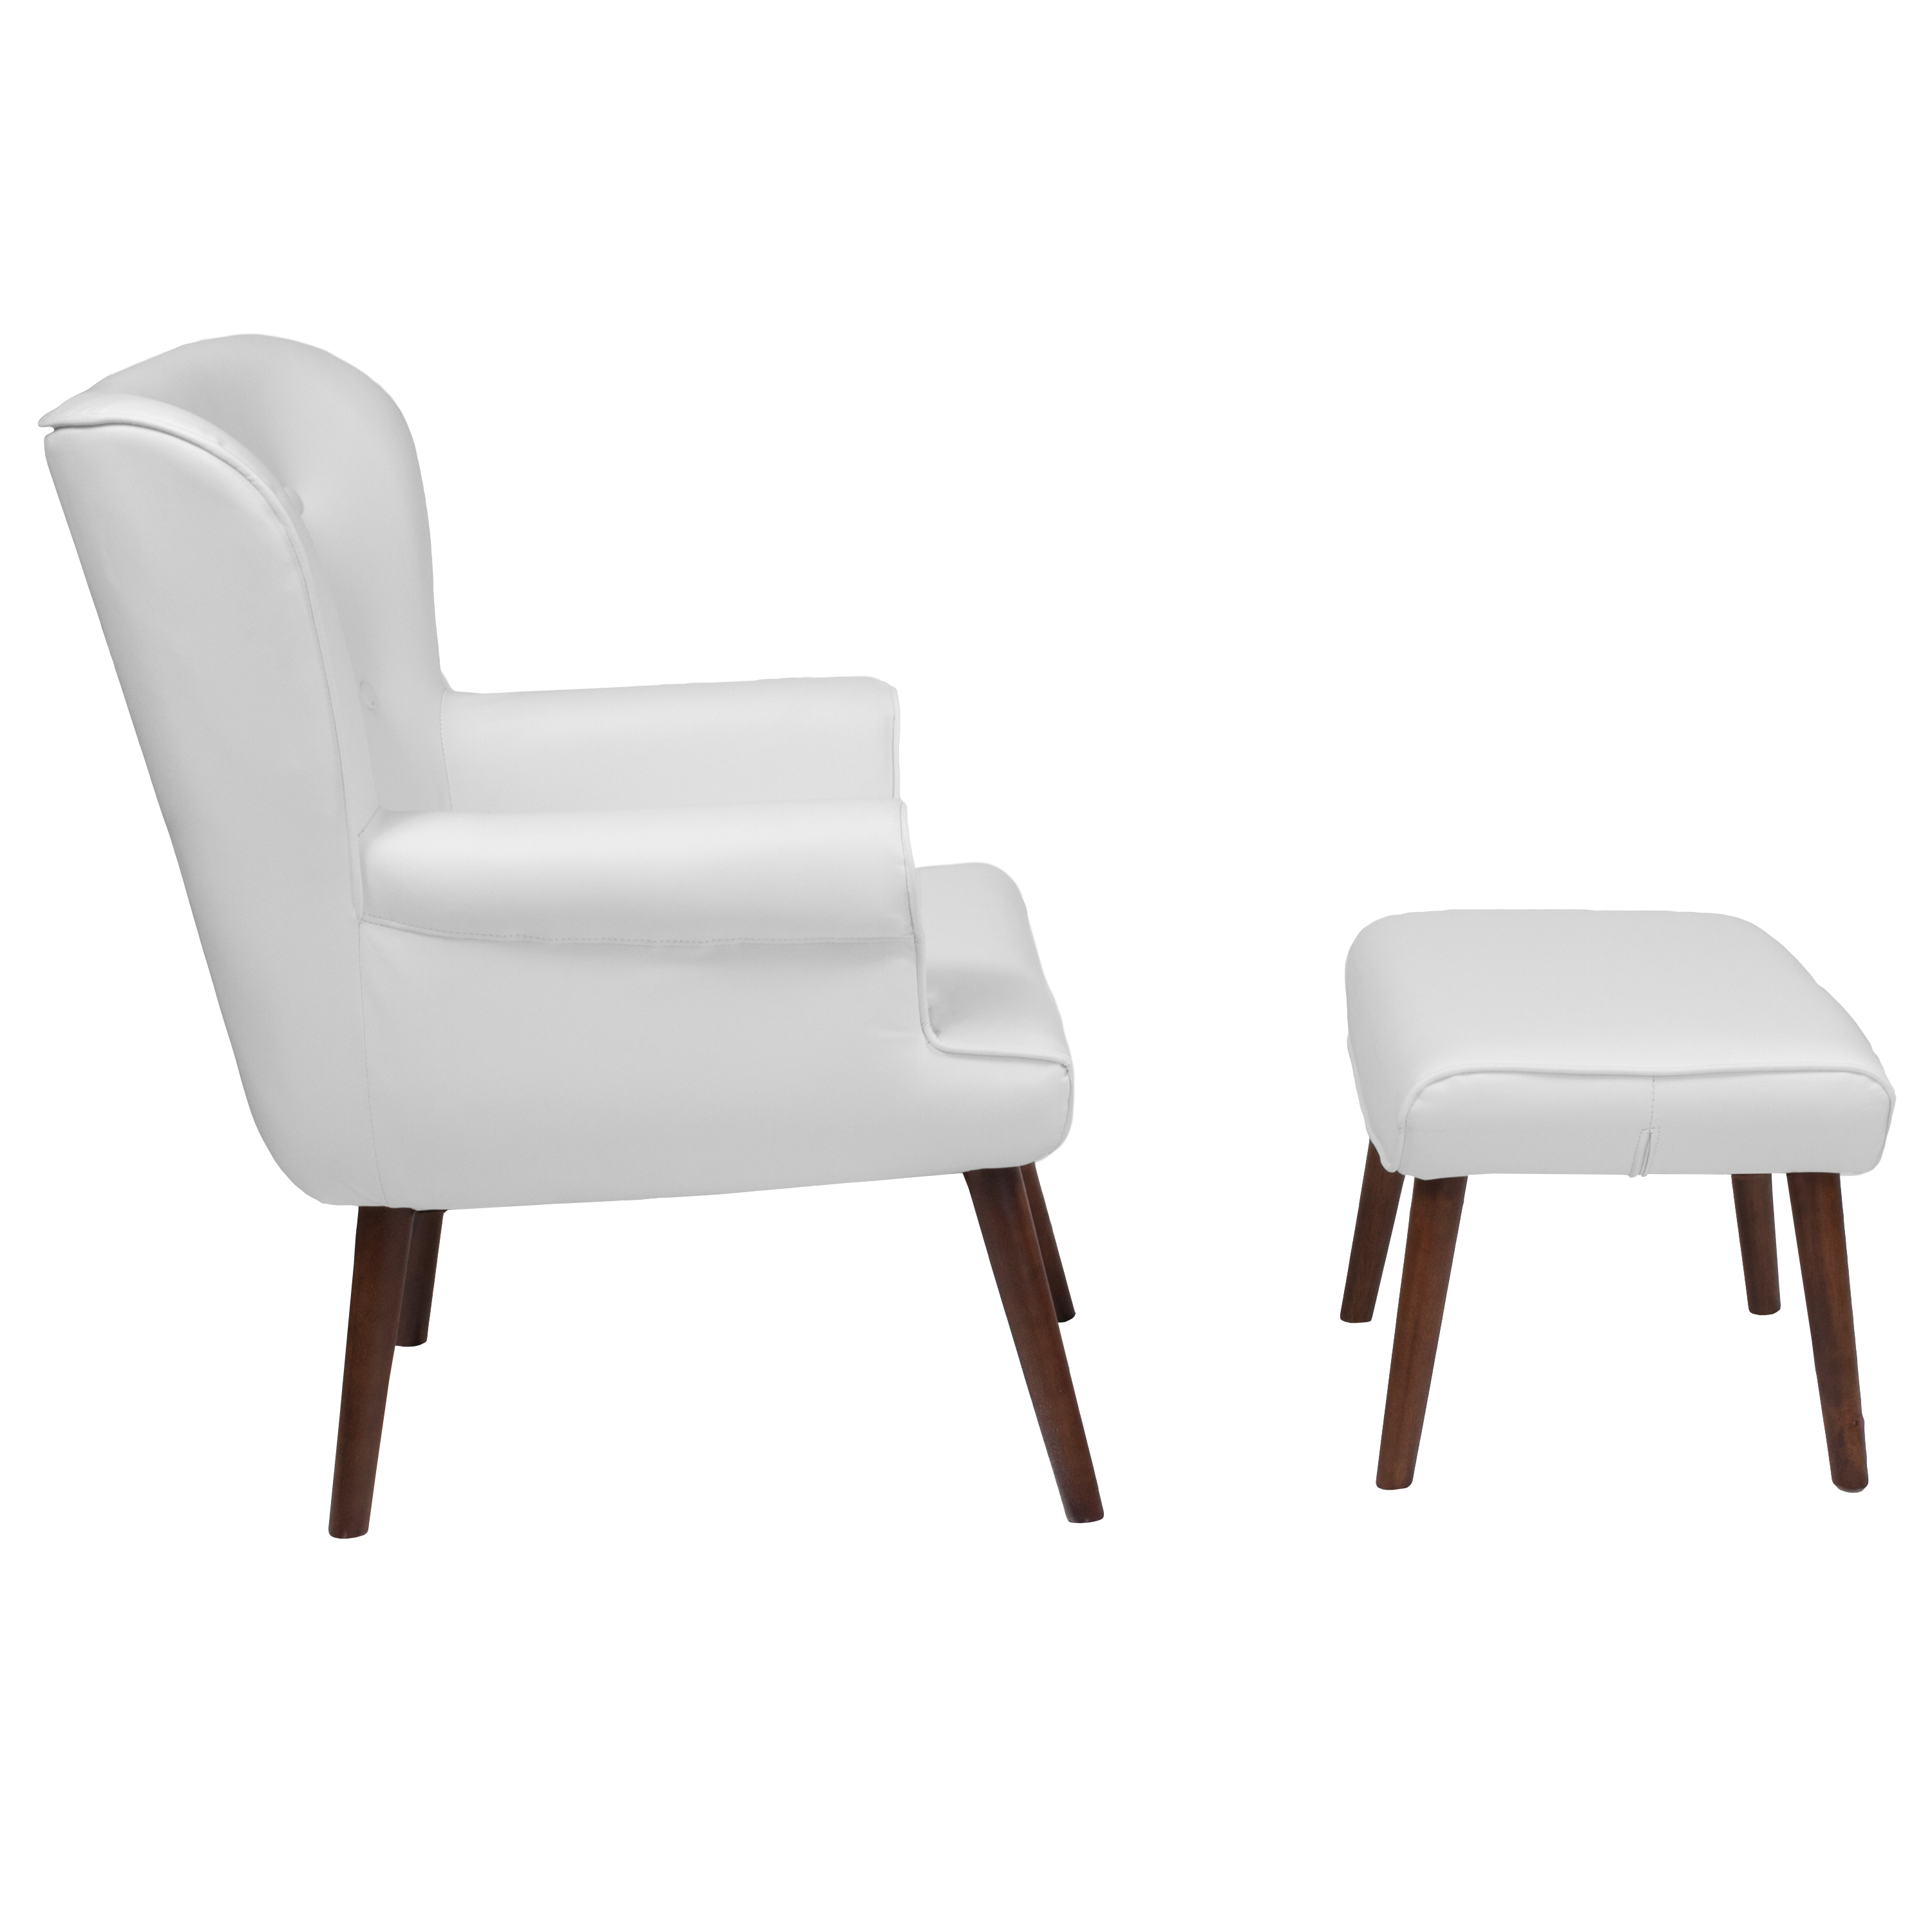 Flash Furniture Bayton Upholstered Wingback Chair with Ottoman in White LeatherSoft - image 3 of 4